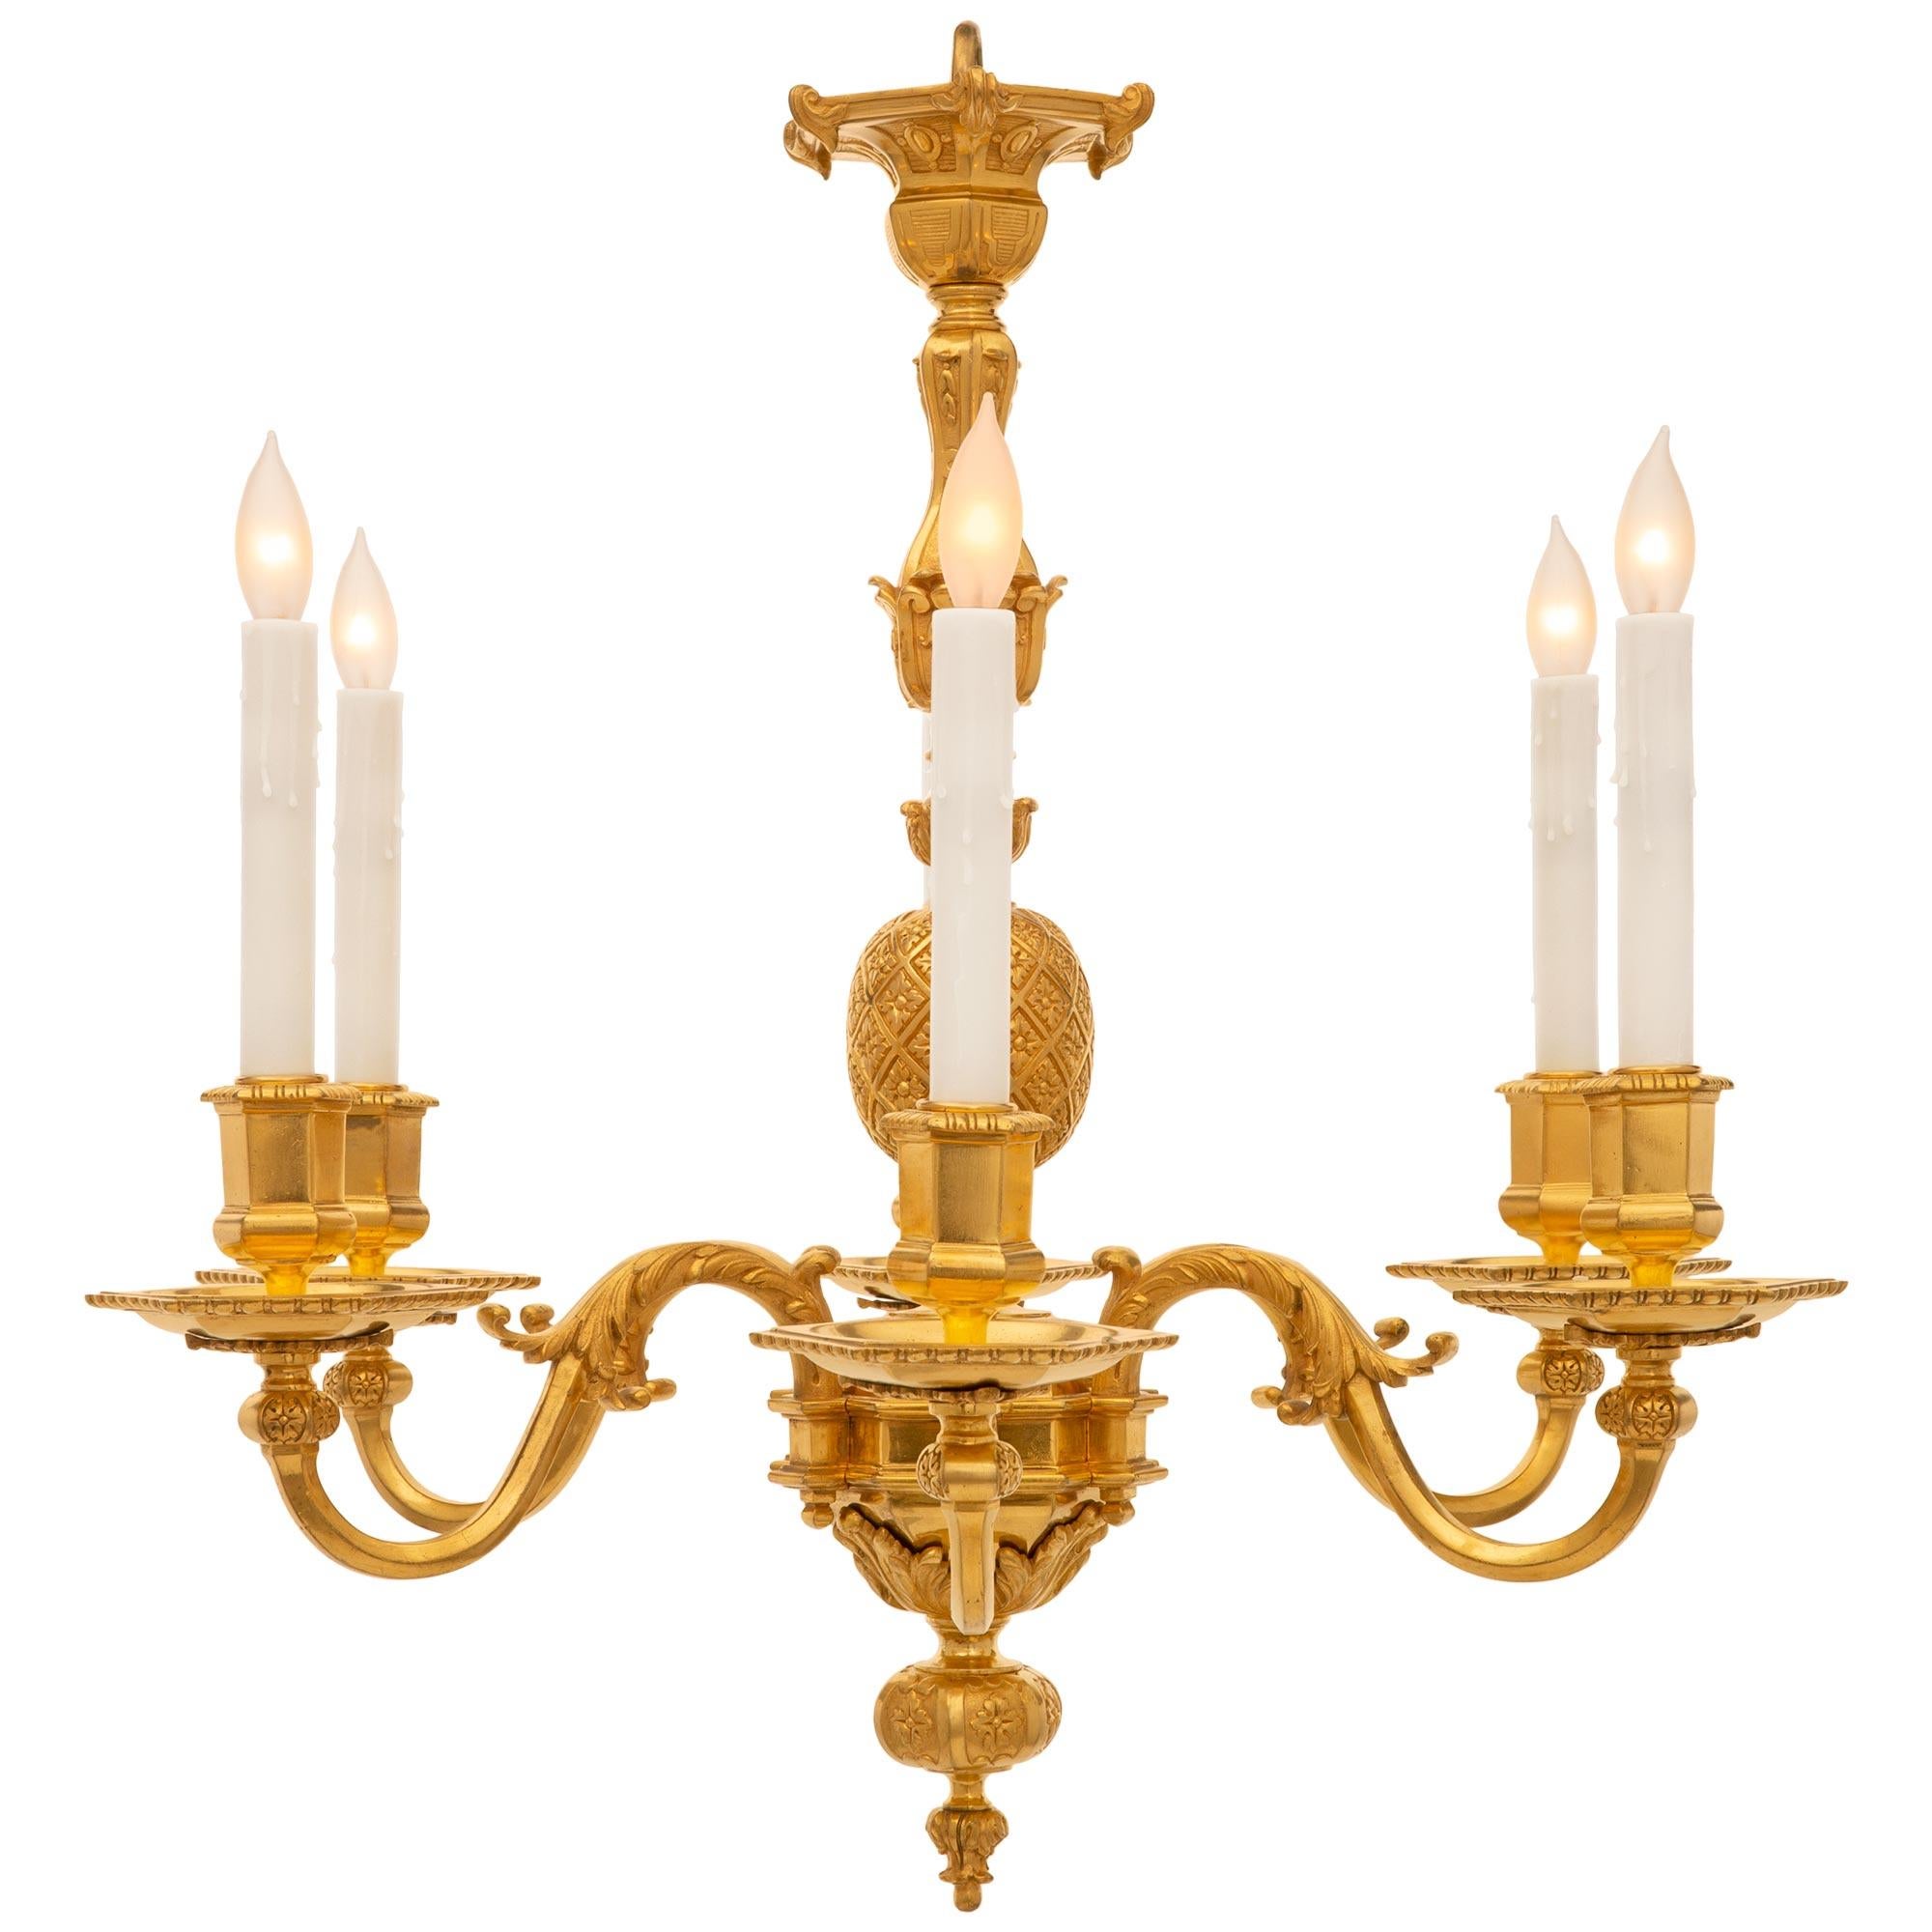 A striking and most unique French 19th century Louis XIV st. ormolu chandelier, attributed to Vian. The six arm chandelier is centered by a beautiful and richly chased floral finial leading up to acanthus leaves encasing the body. The six elegantly